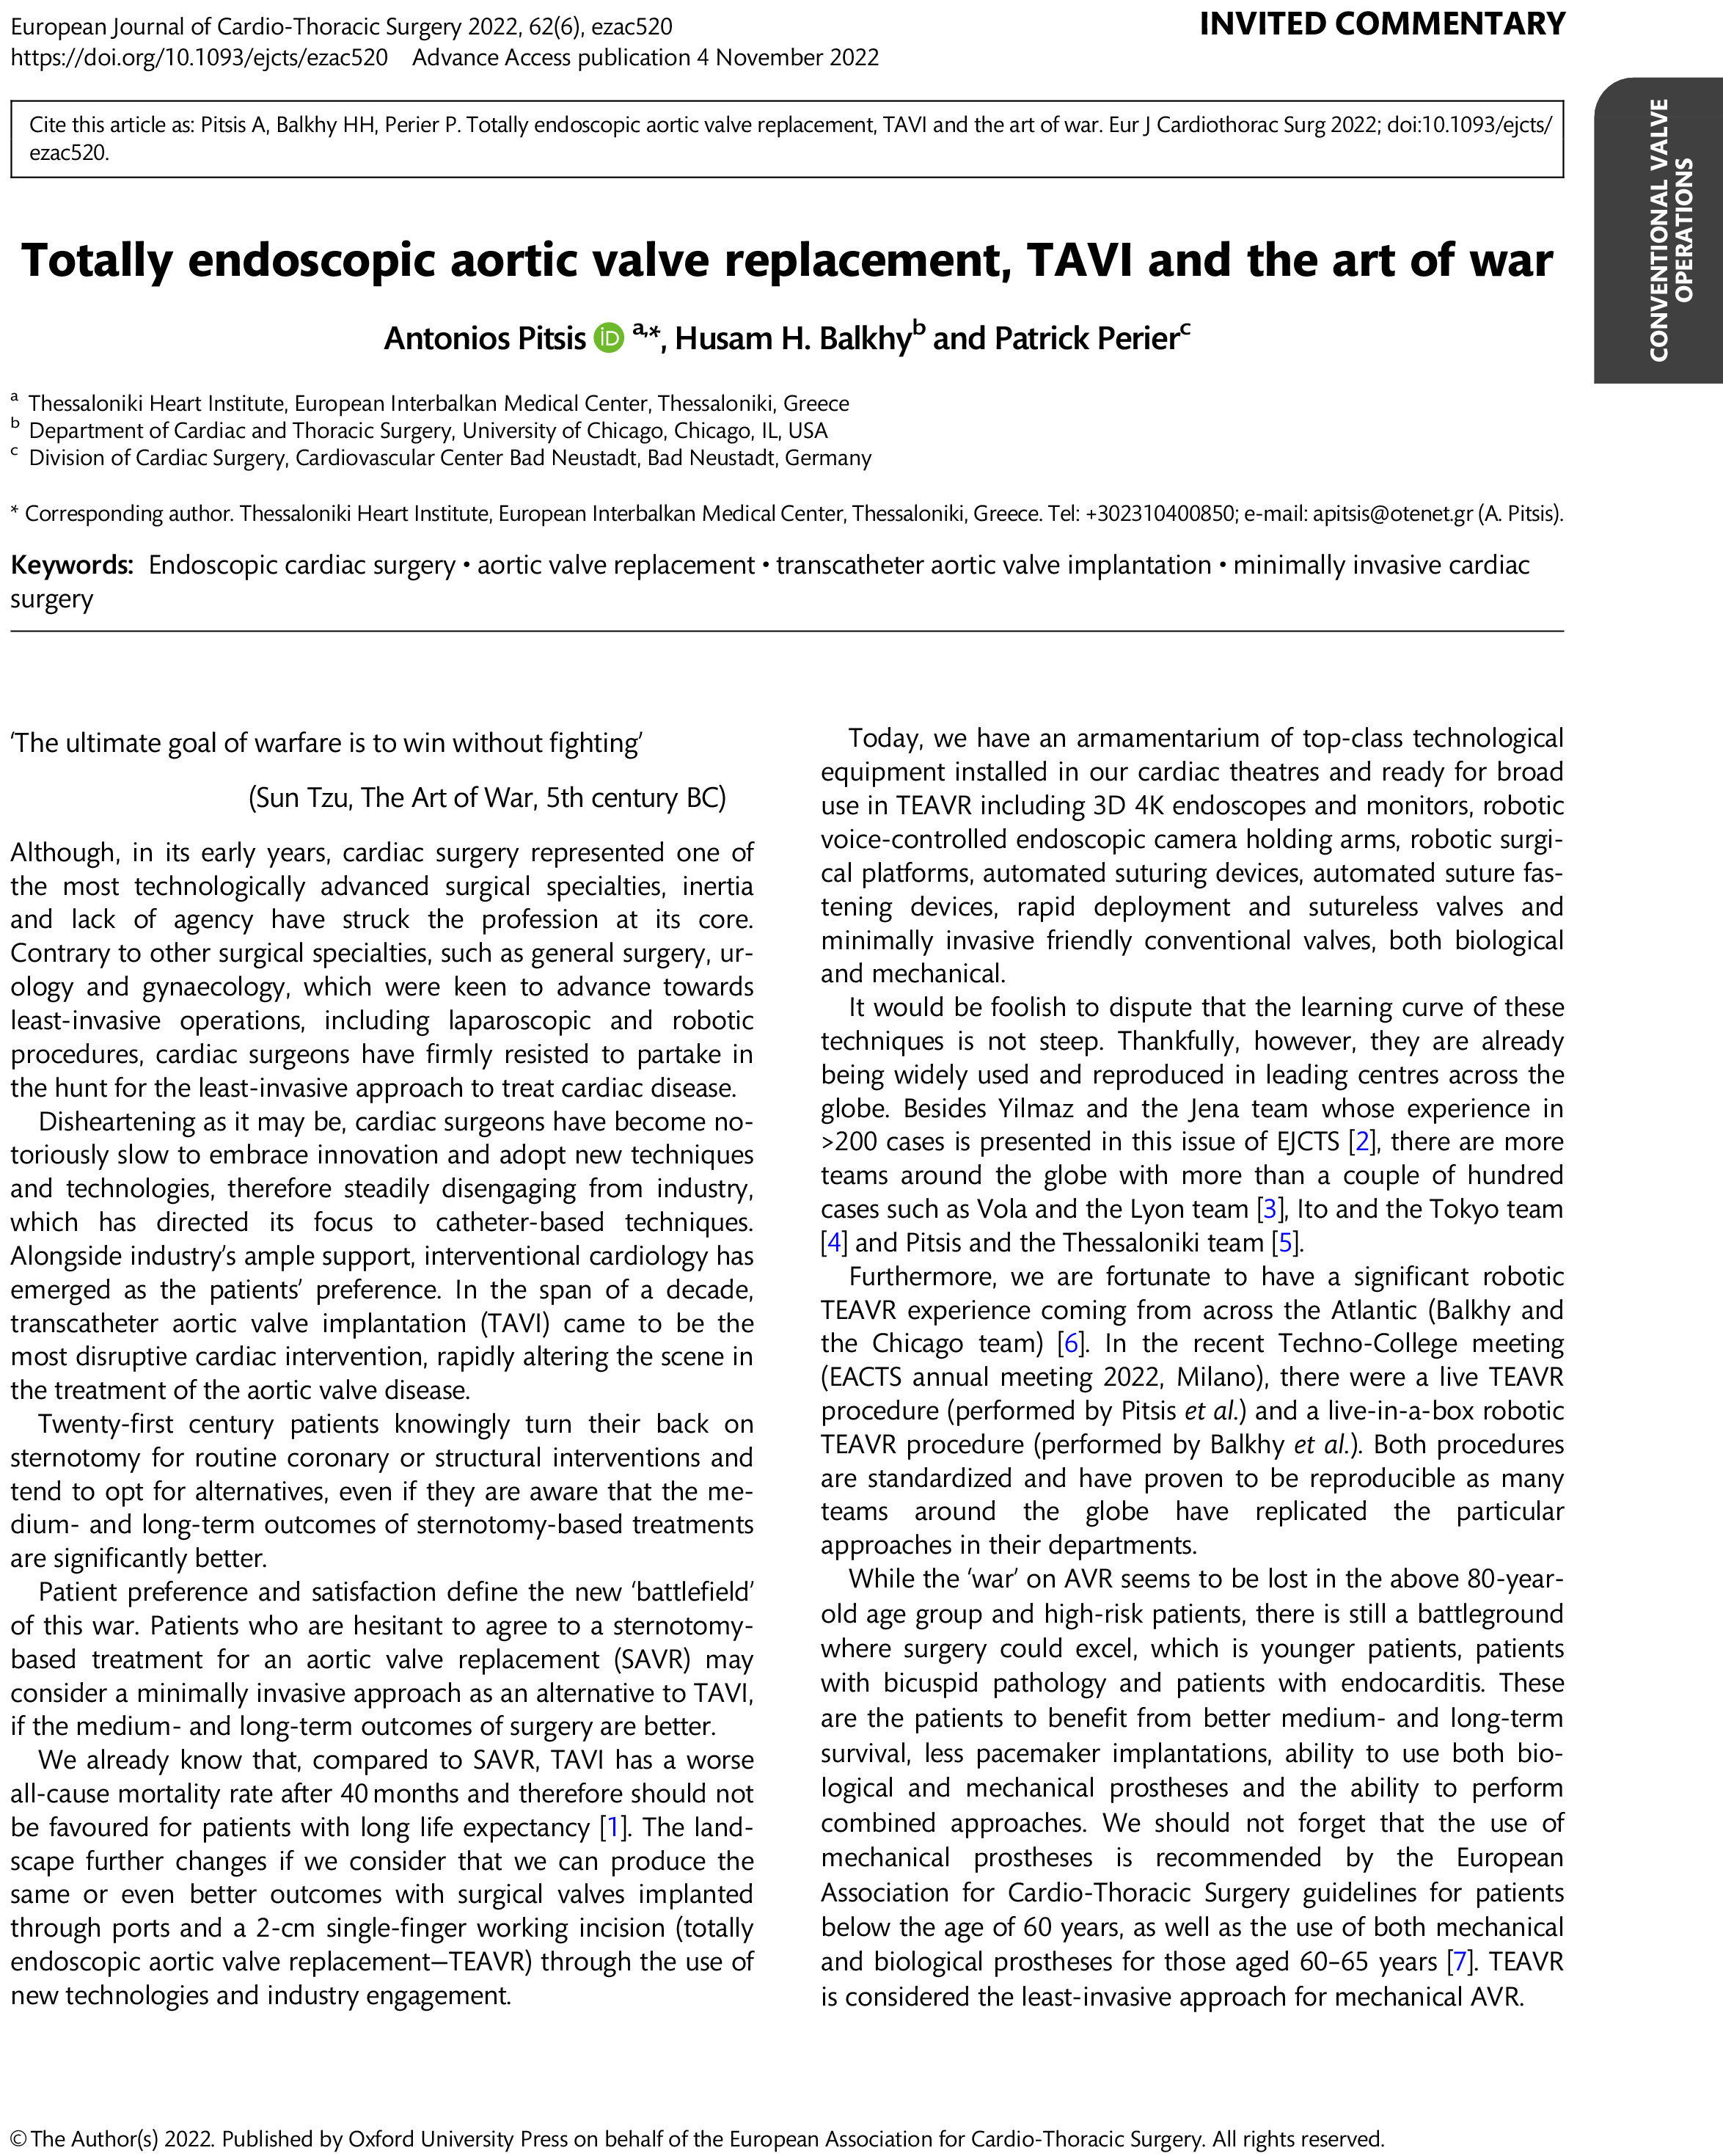 Totally endoscopic aortic valve replacement, TAVI and the art of war-1.jpg